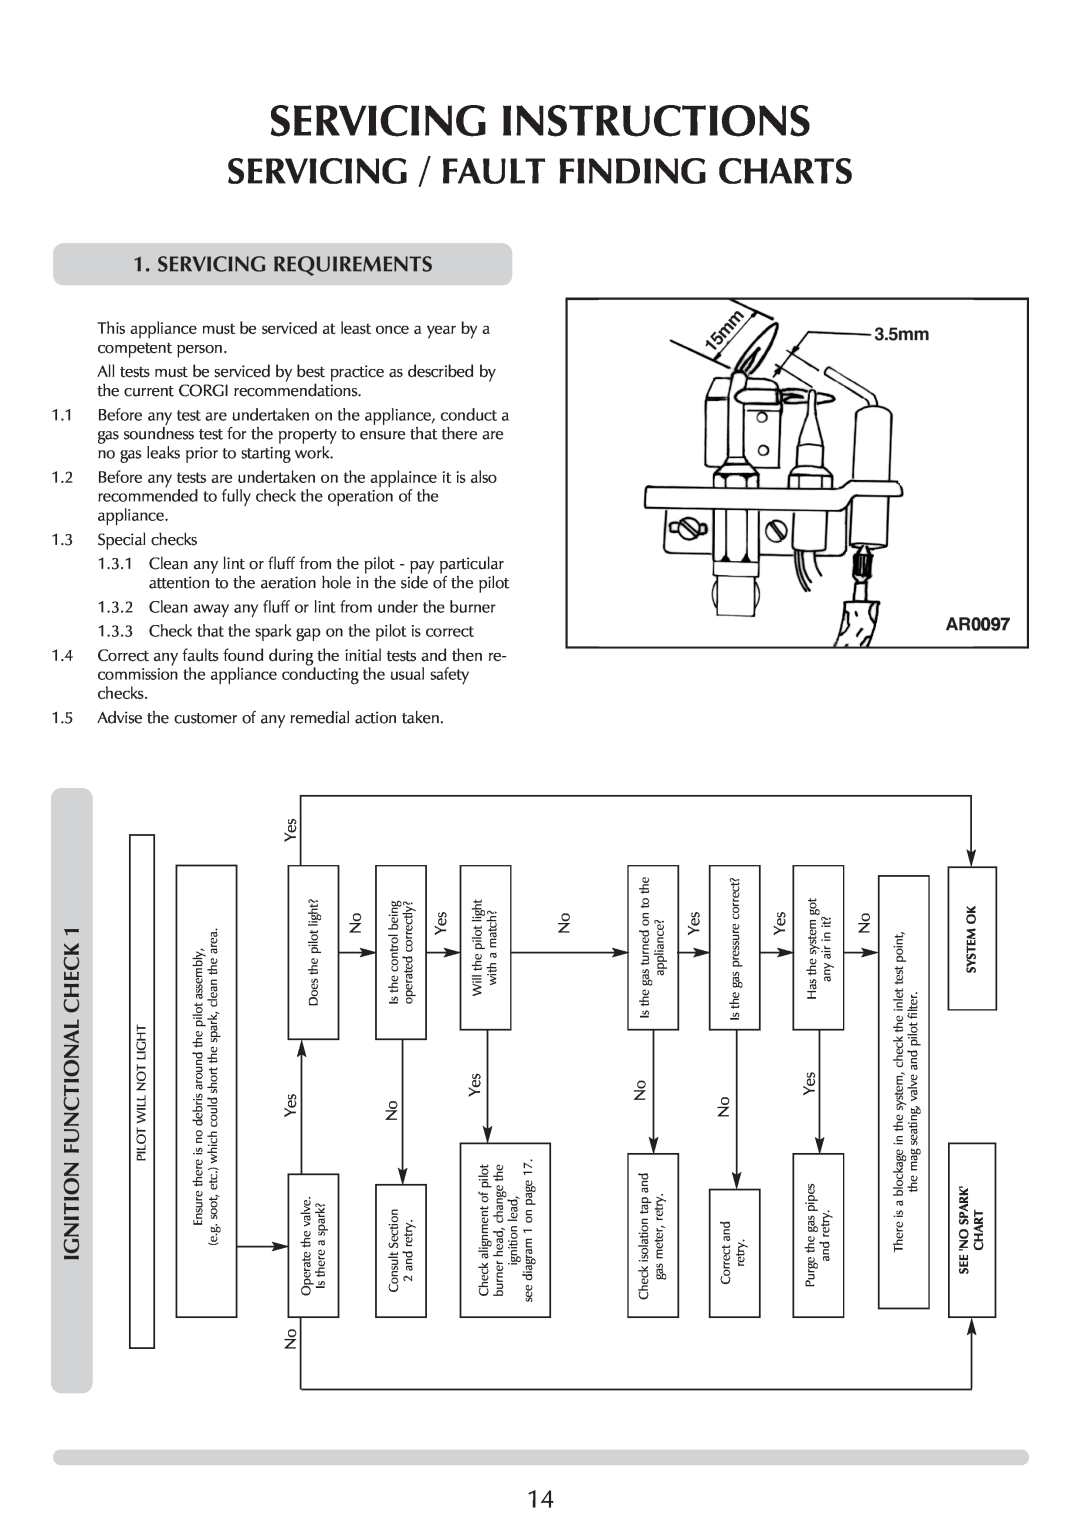 Stovax manual Servicing Instructions, Servicing / Fault Finding Charts, 3.5mm, AR0097 